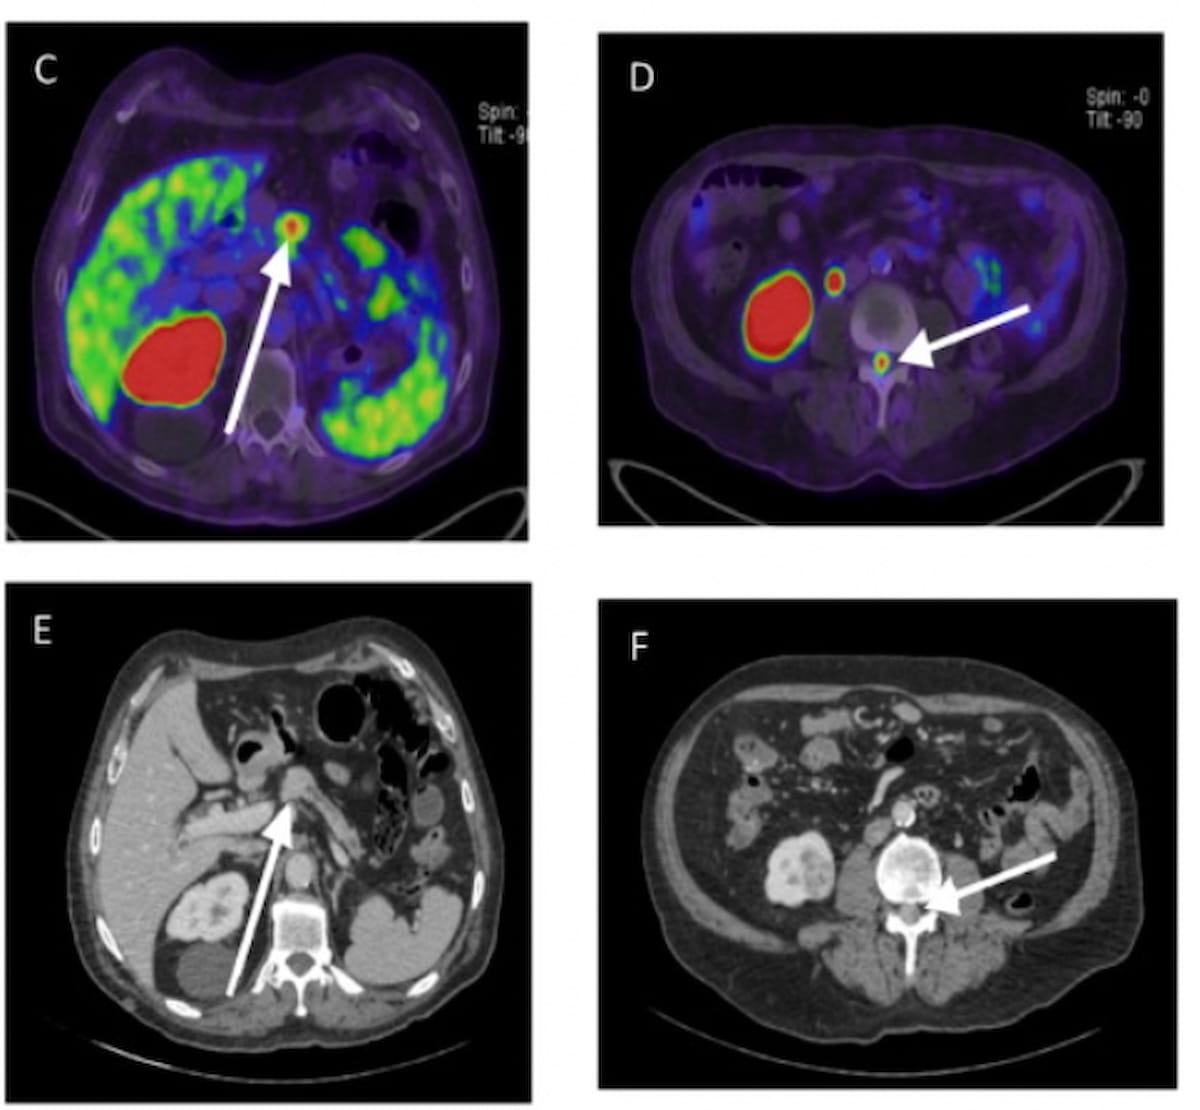 Study: PSMA PET/CT Identifies 18 Percent More Metastatic Renal Cancers than Conventional Imaging